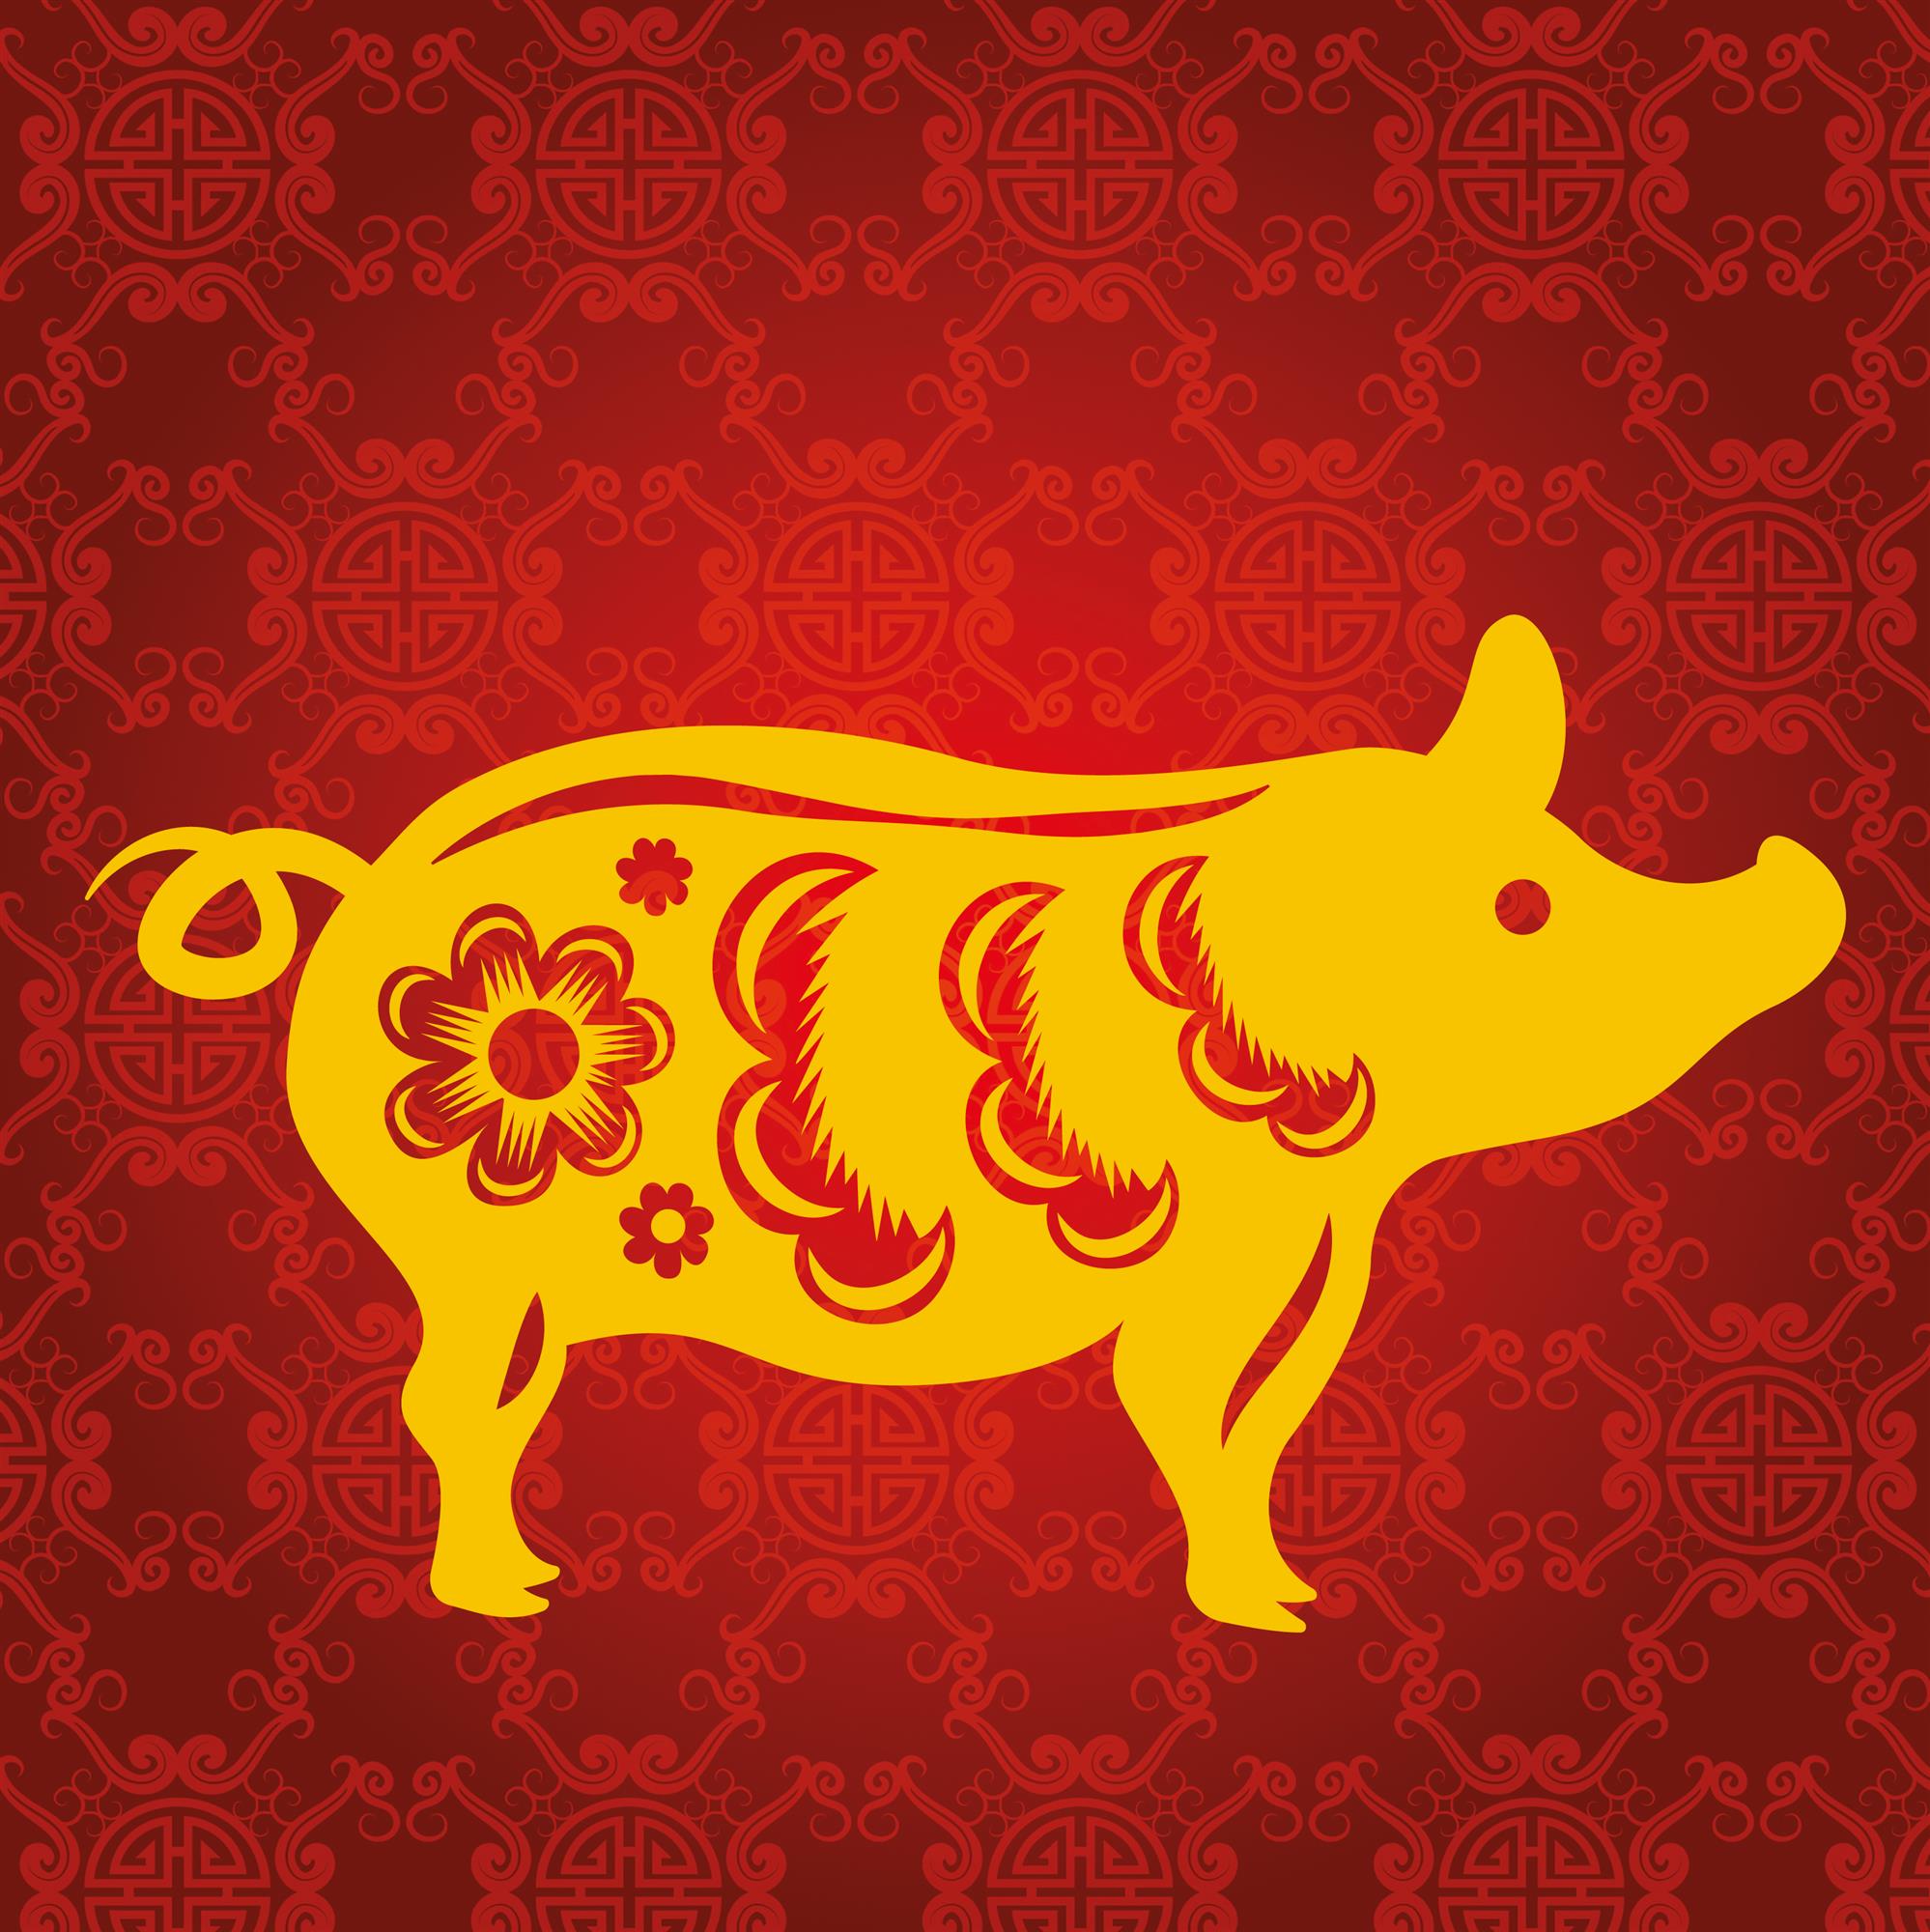 Red and yellow Chinese style illustration of a boar